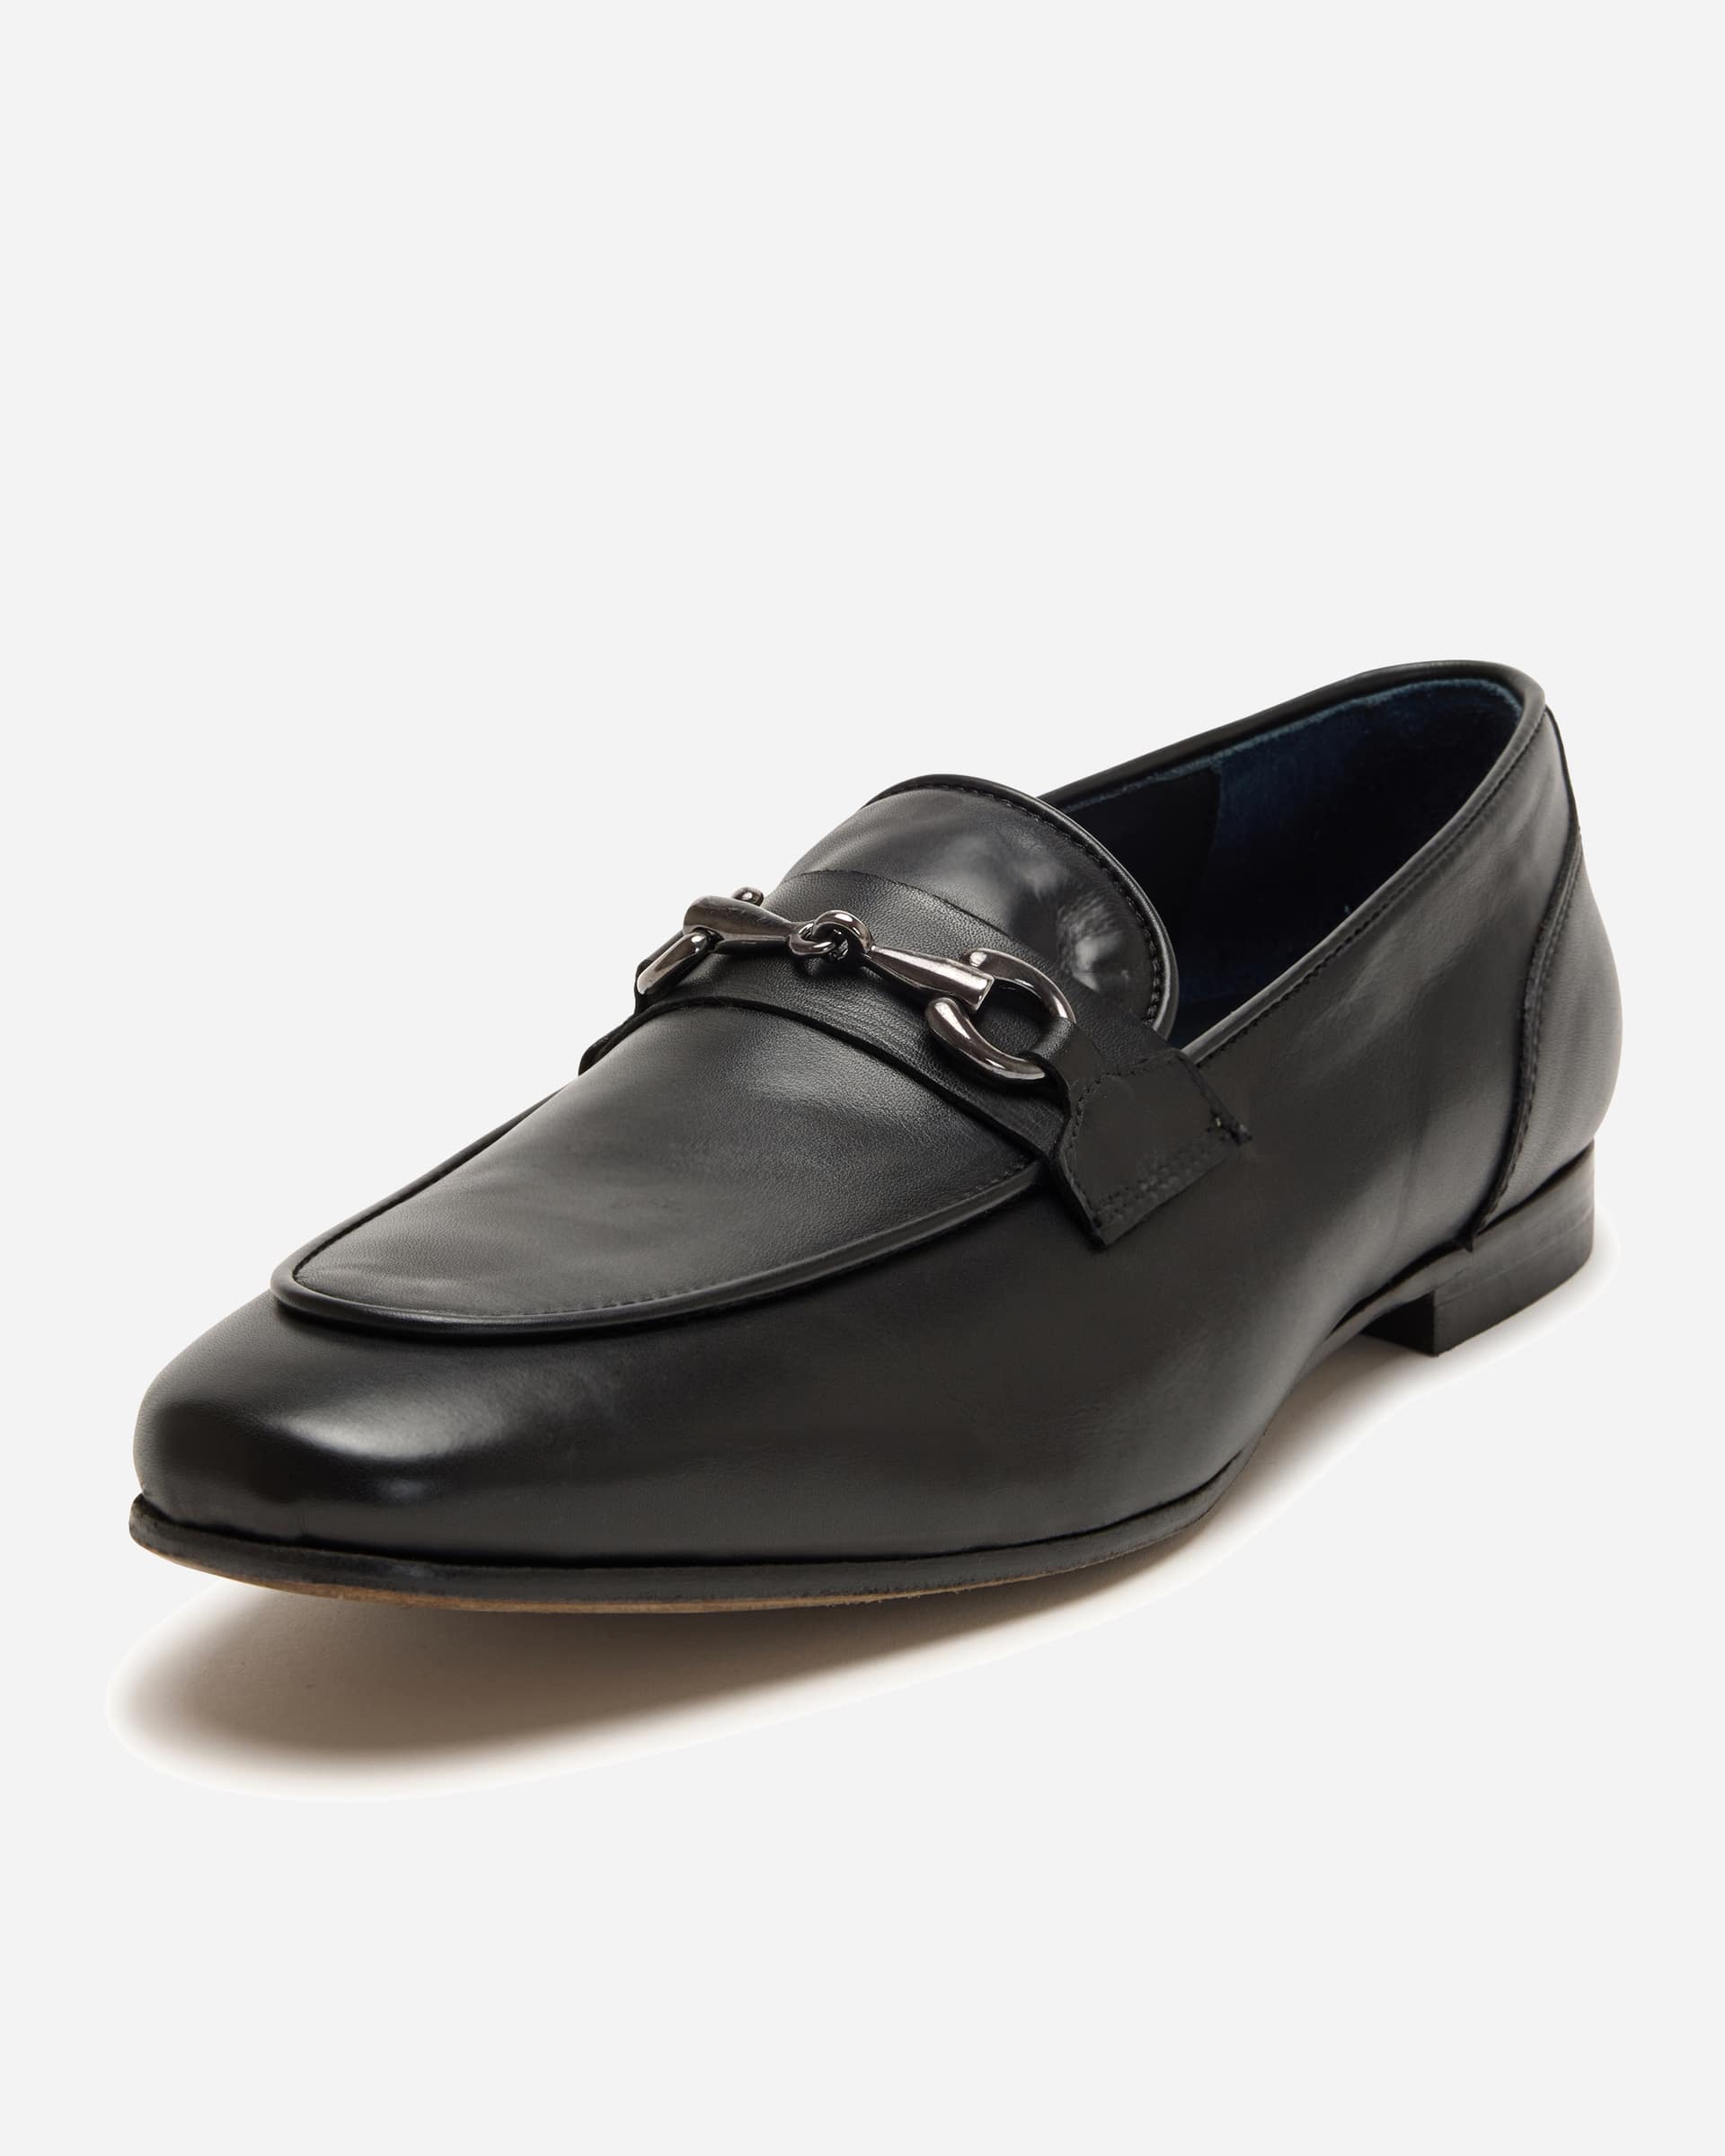 Horsebit Penny Loafers - Men's Loafers at Menzclub